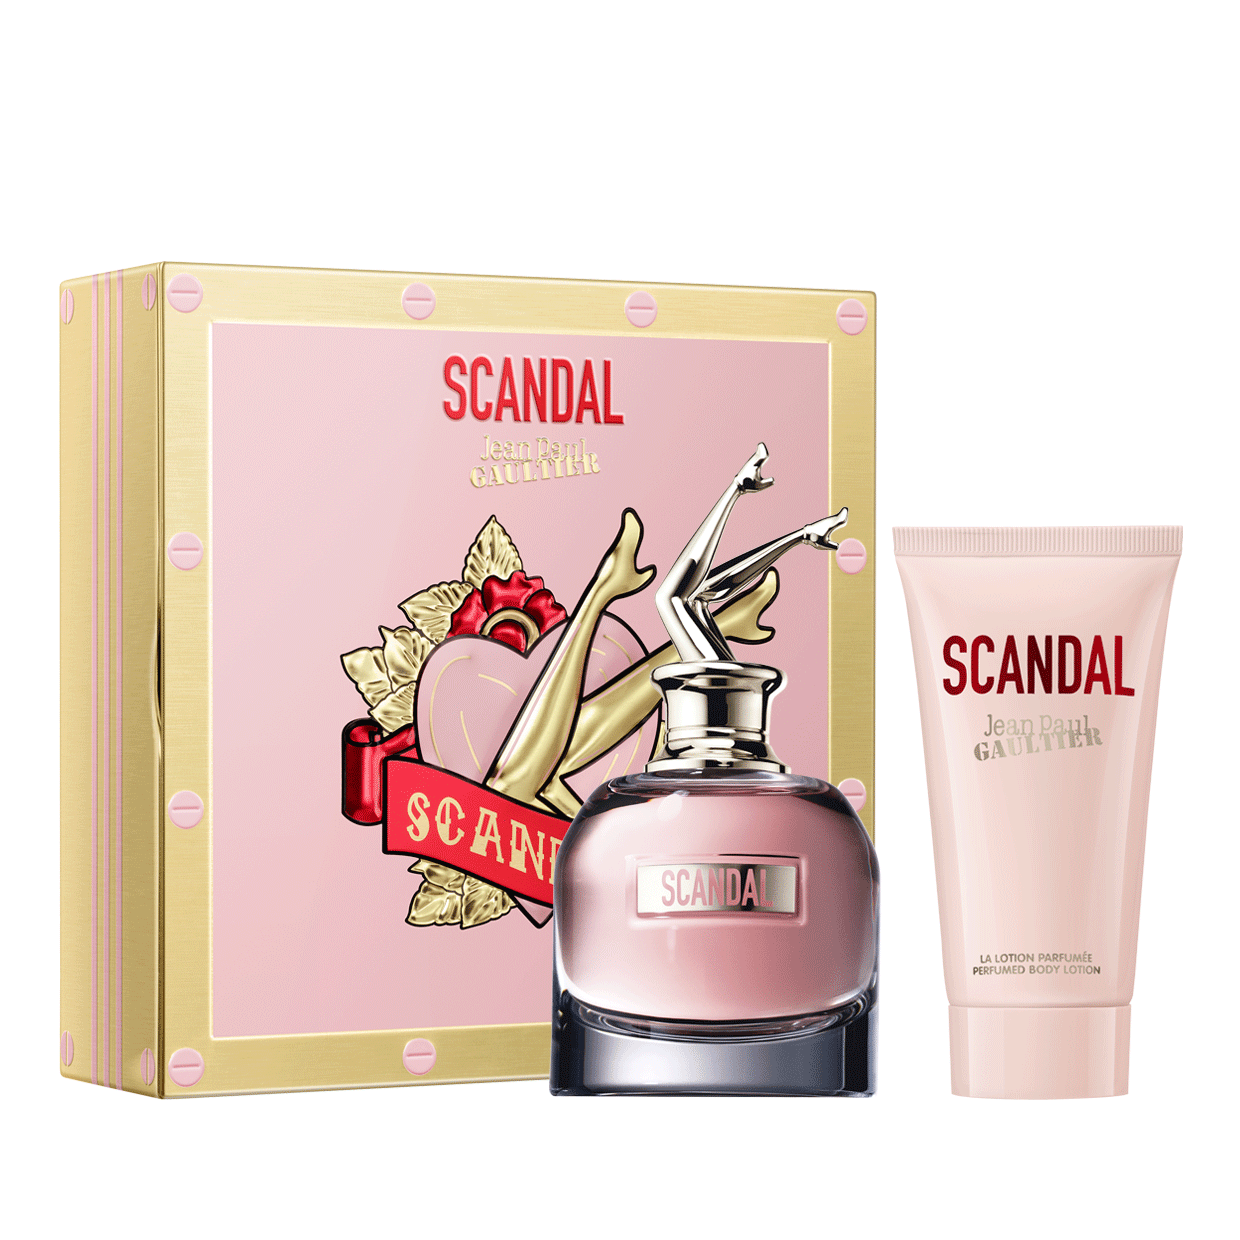 Scandal 80 ml and Body Lotion 75ml